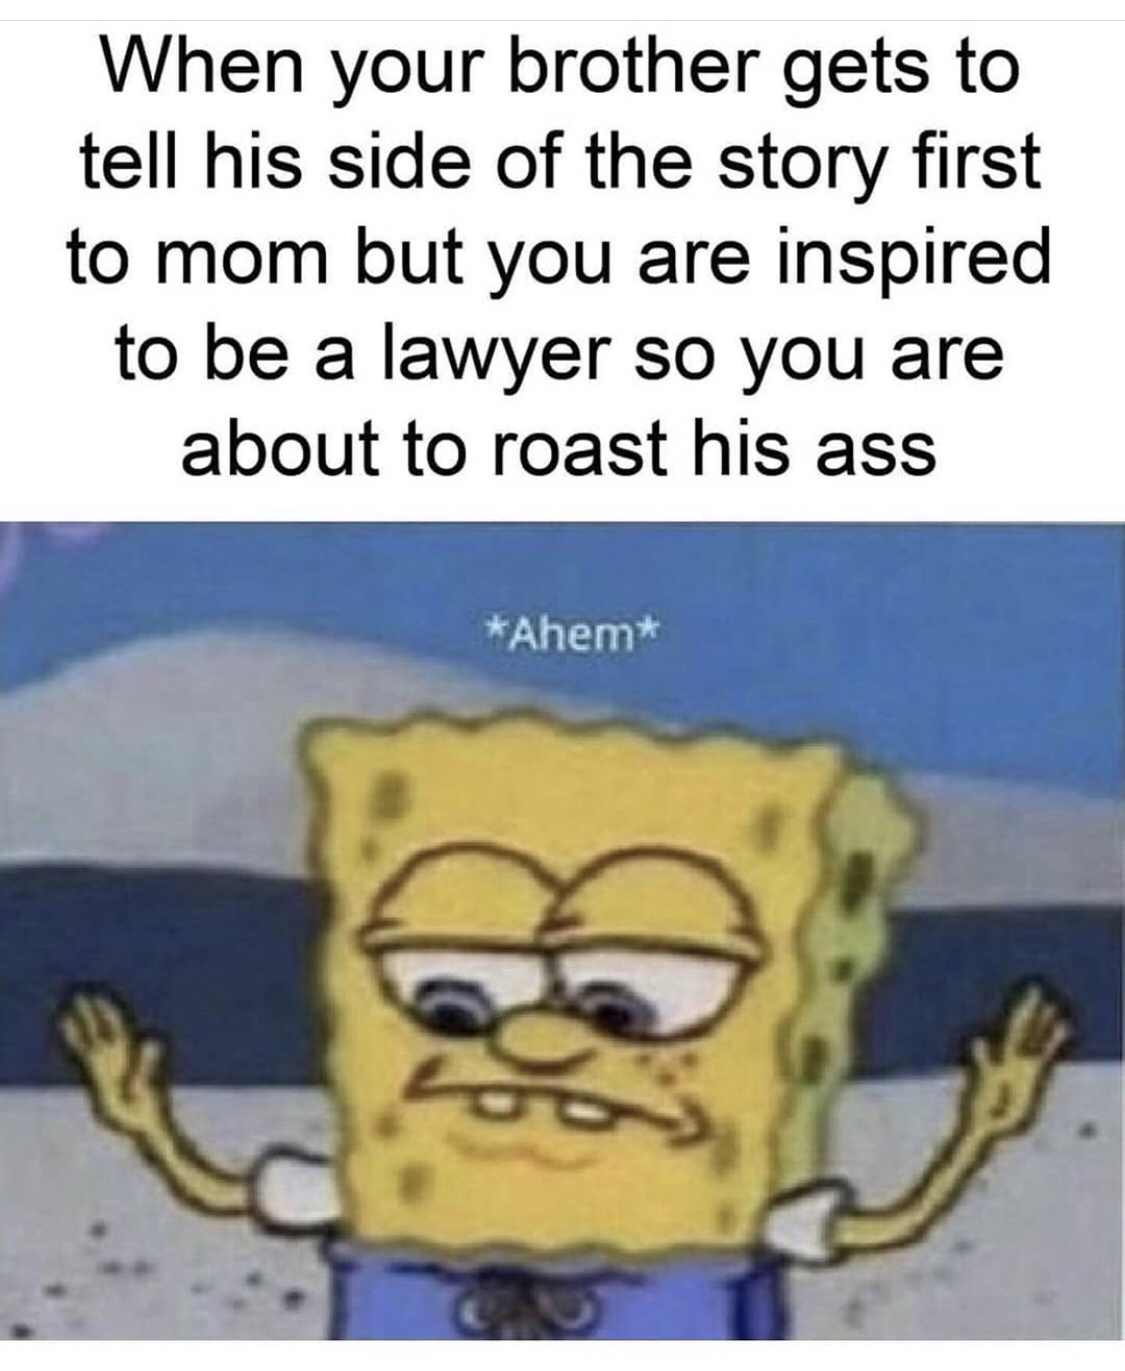 funny - When your brother gets to tell his side of the story first to mom but you are inspired to be a lawyer so you are about to roast his ass Ahem